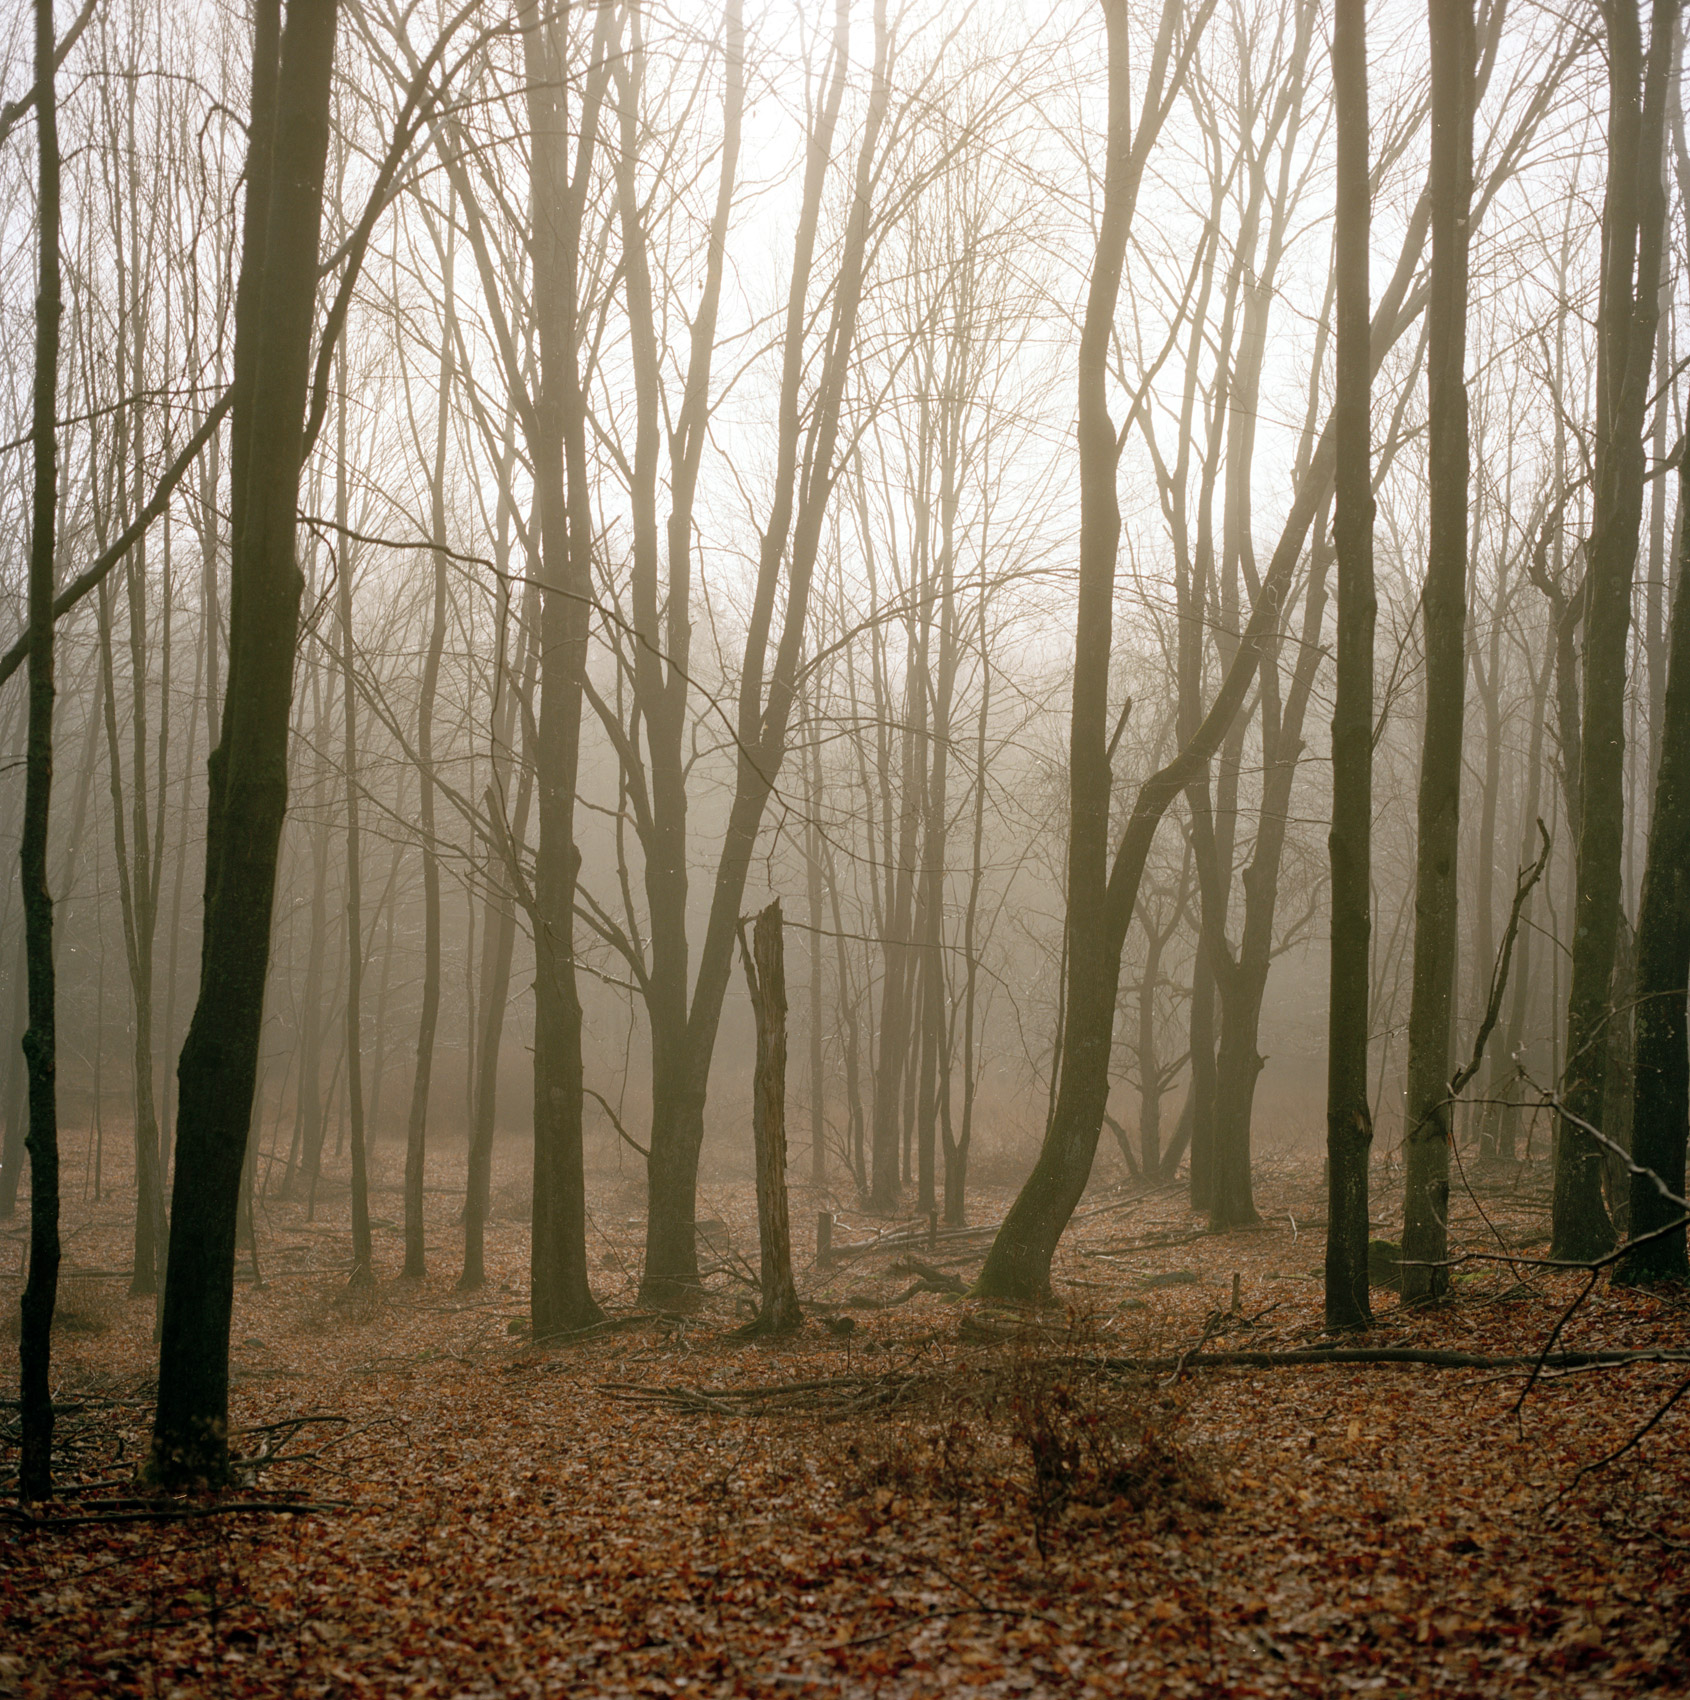 BARE-BRANCH-TREES-IN-THE-MISTY-MORNING-FOREST